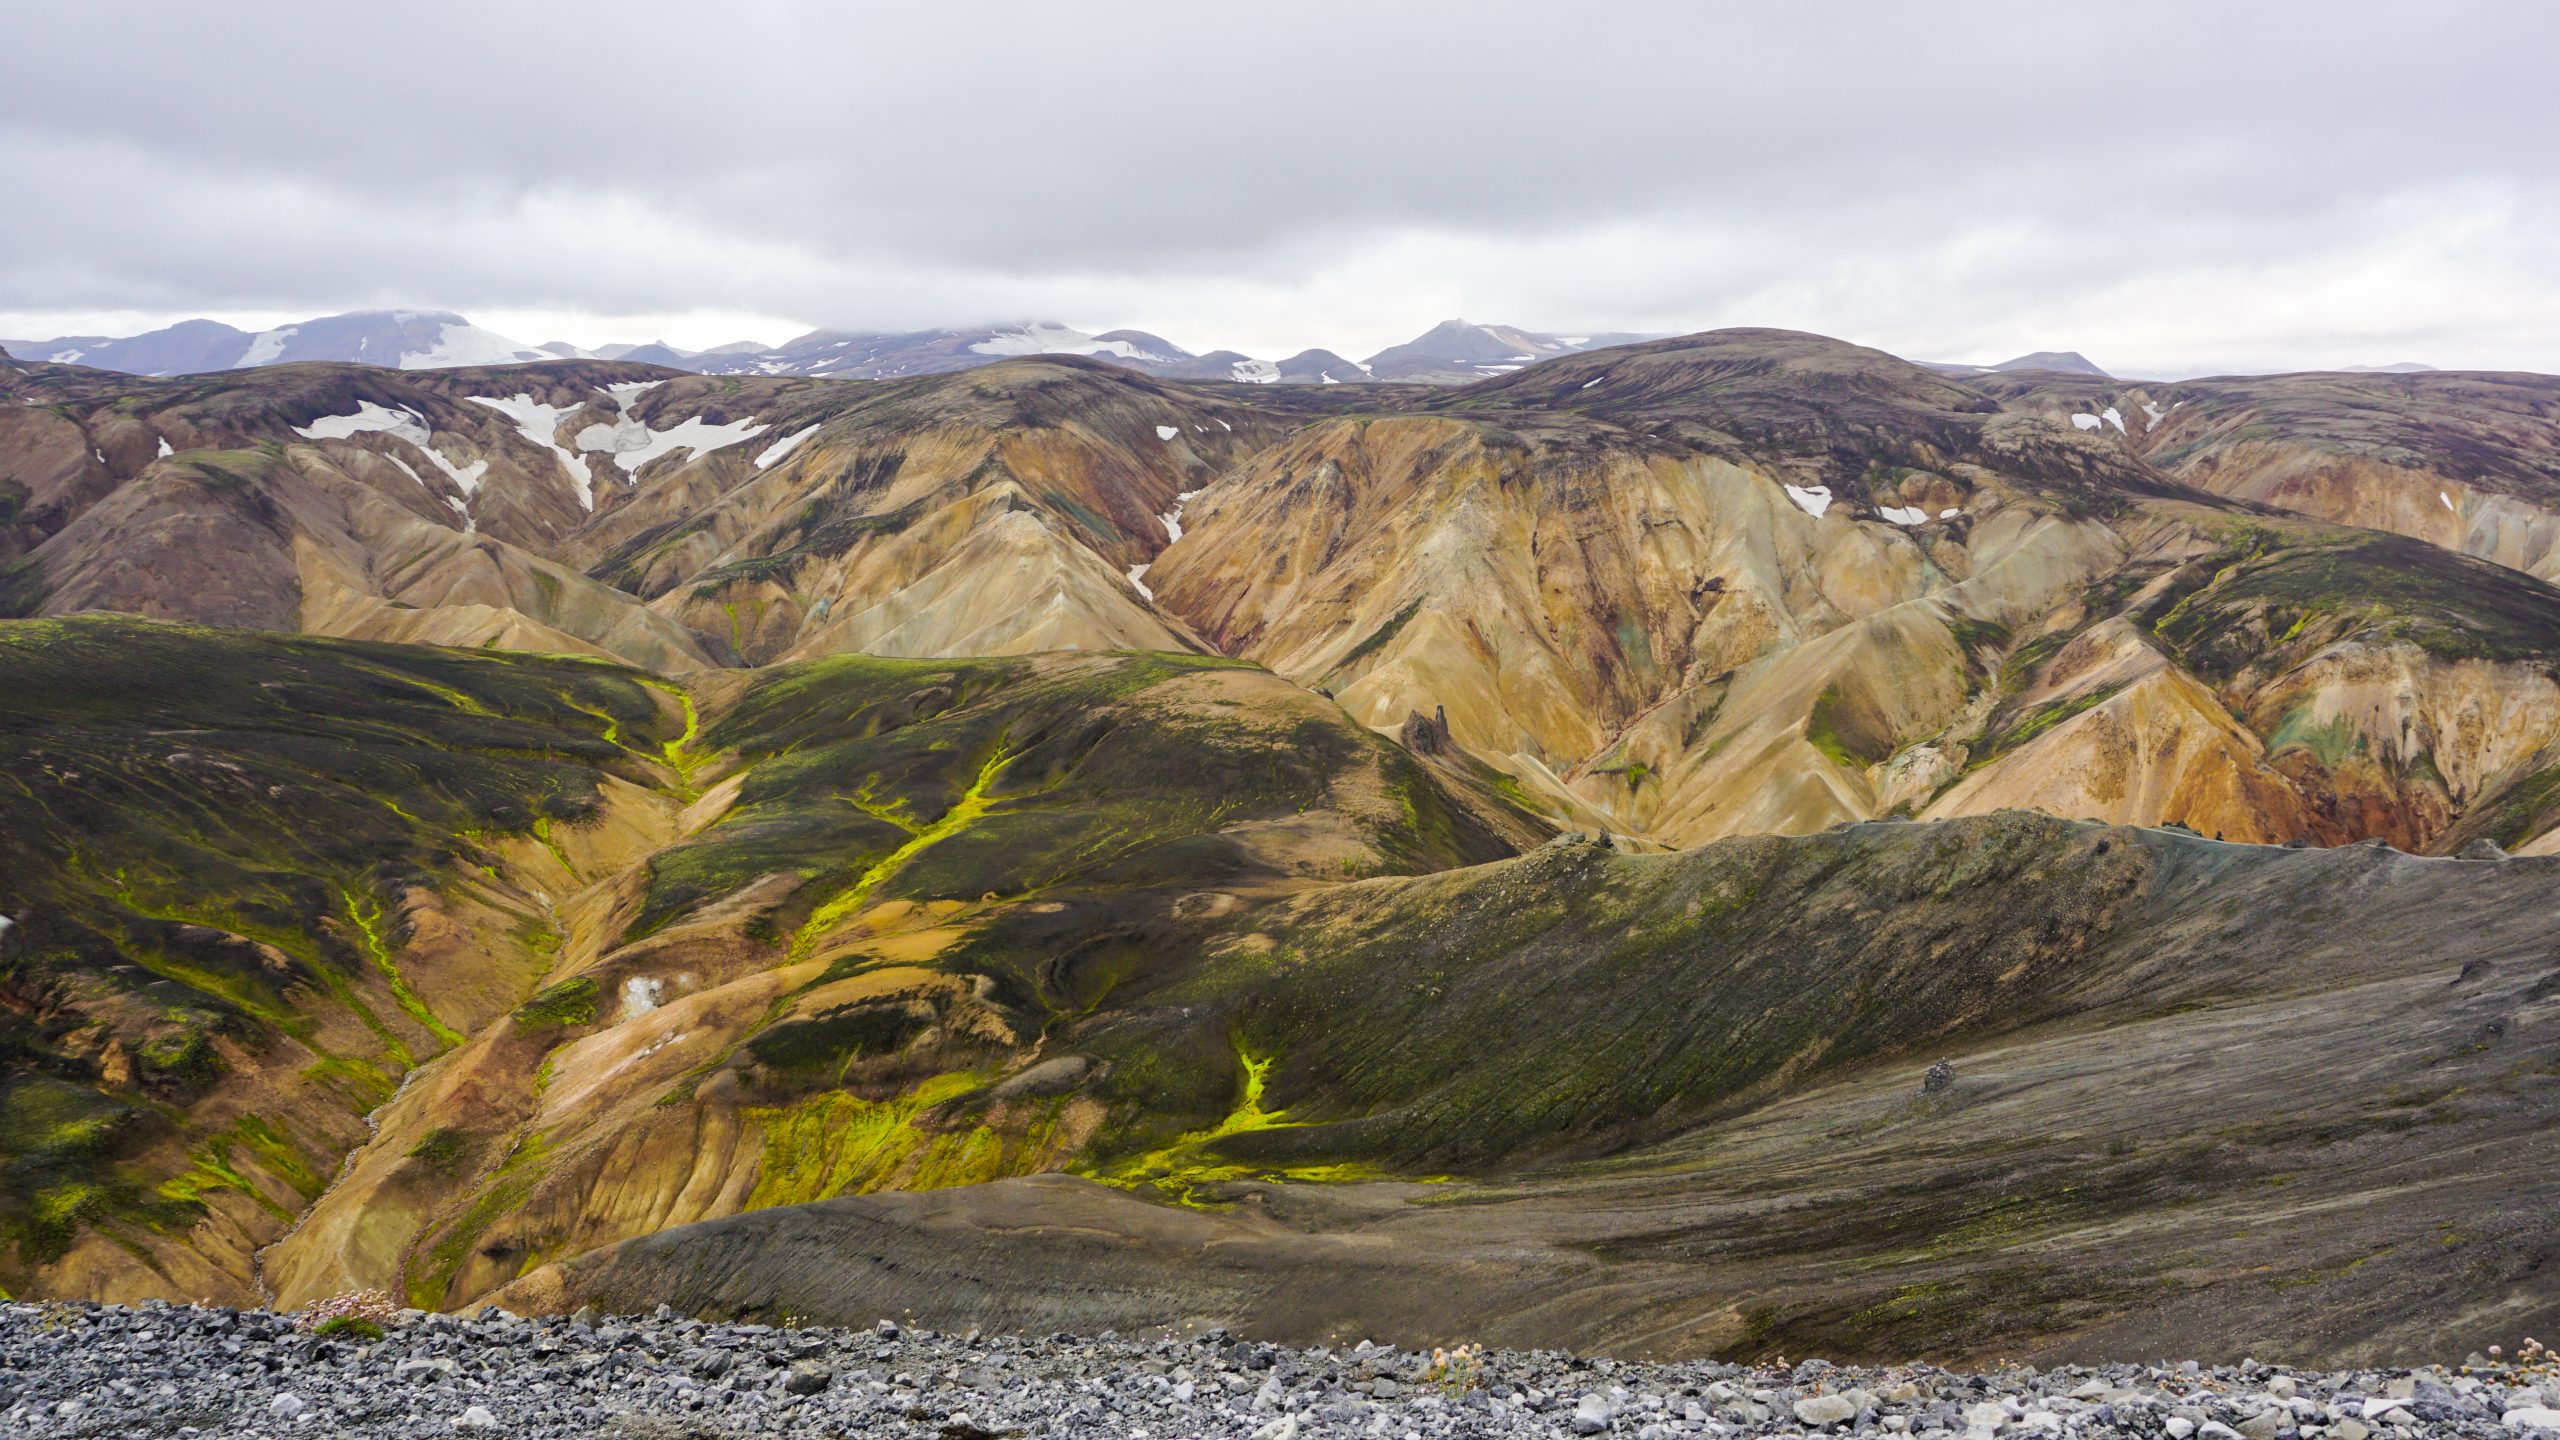 Various shades of green and brown at Landmannalaugar, one of the stops of the Iceland road trip itinerary